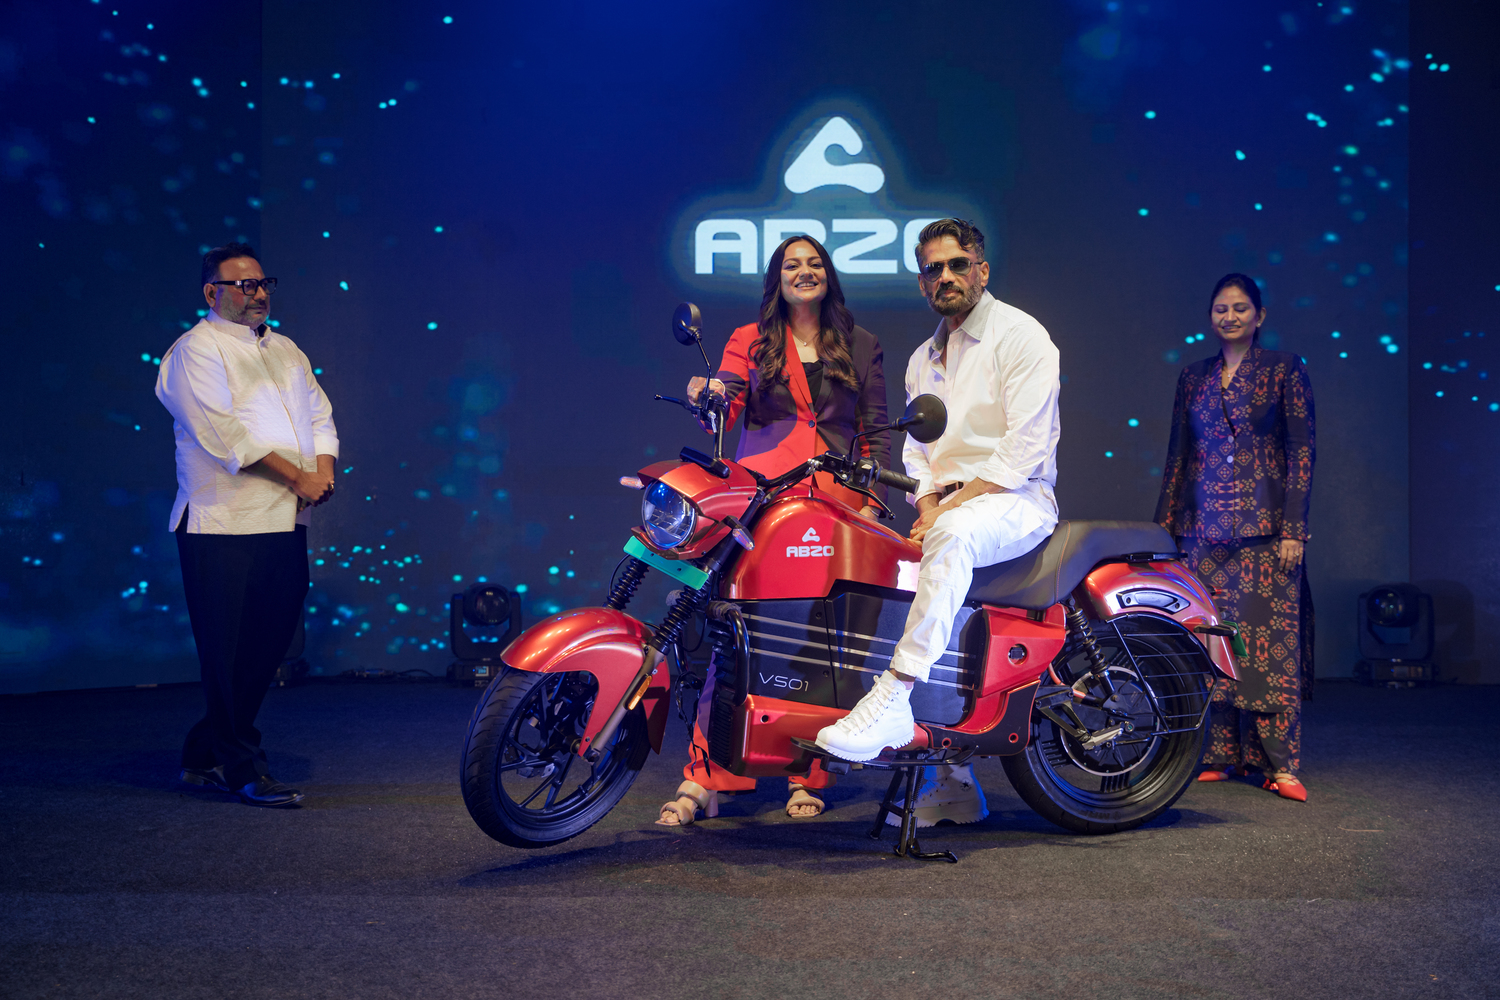 https://e-vehicleinfo.com/abzo-vs01-electric-motorcycle-launched-at-a-price-of-1-80-lakh-180km-range/